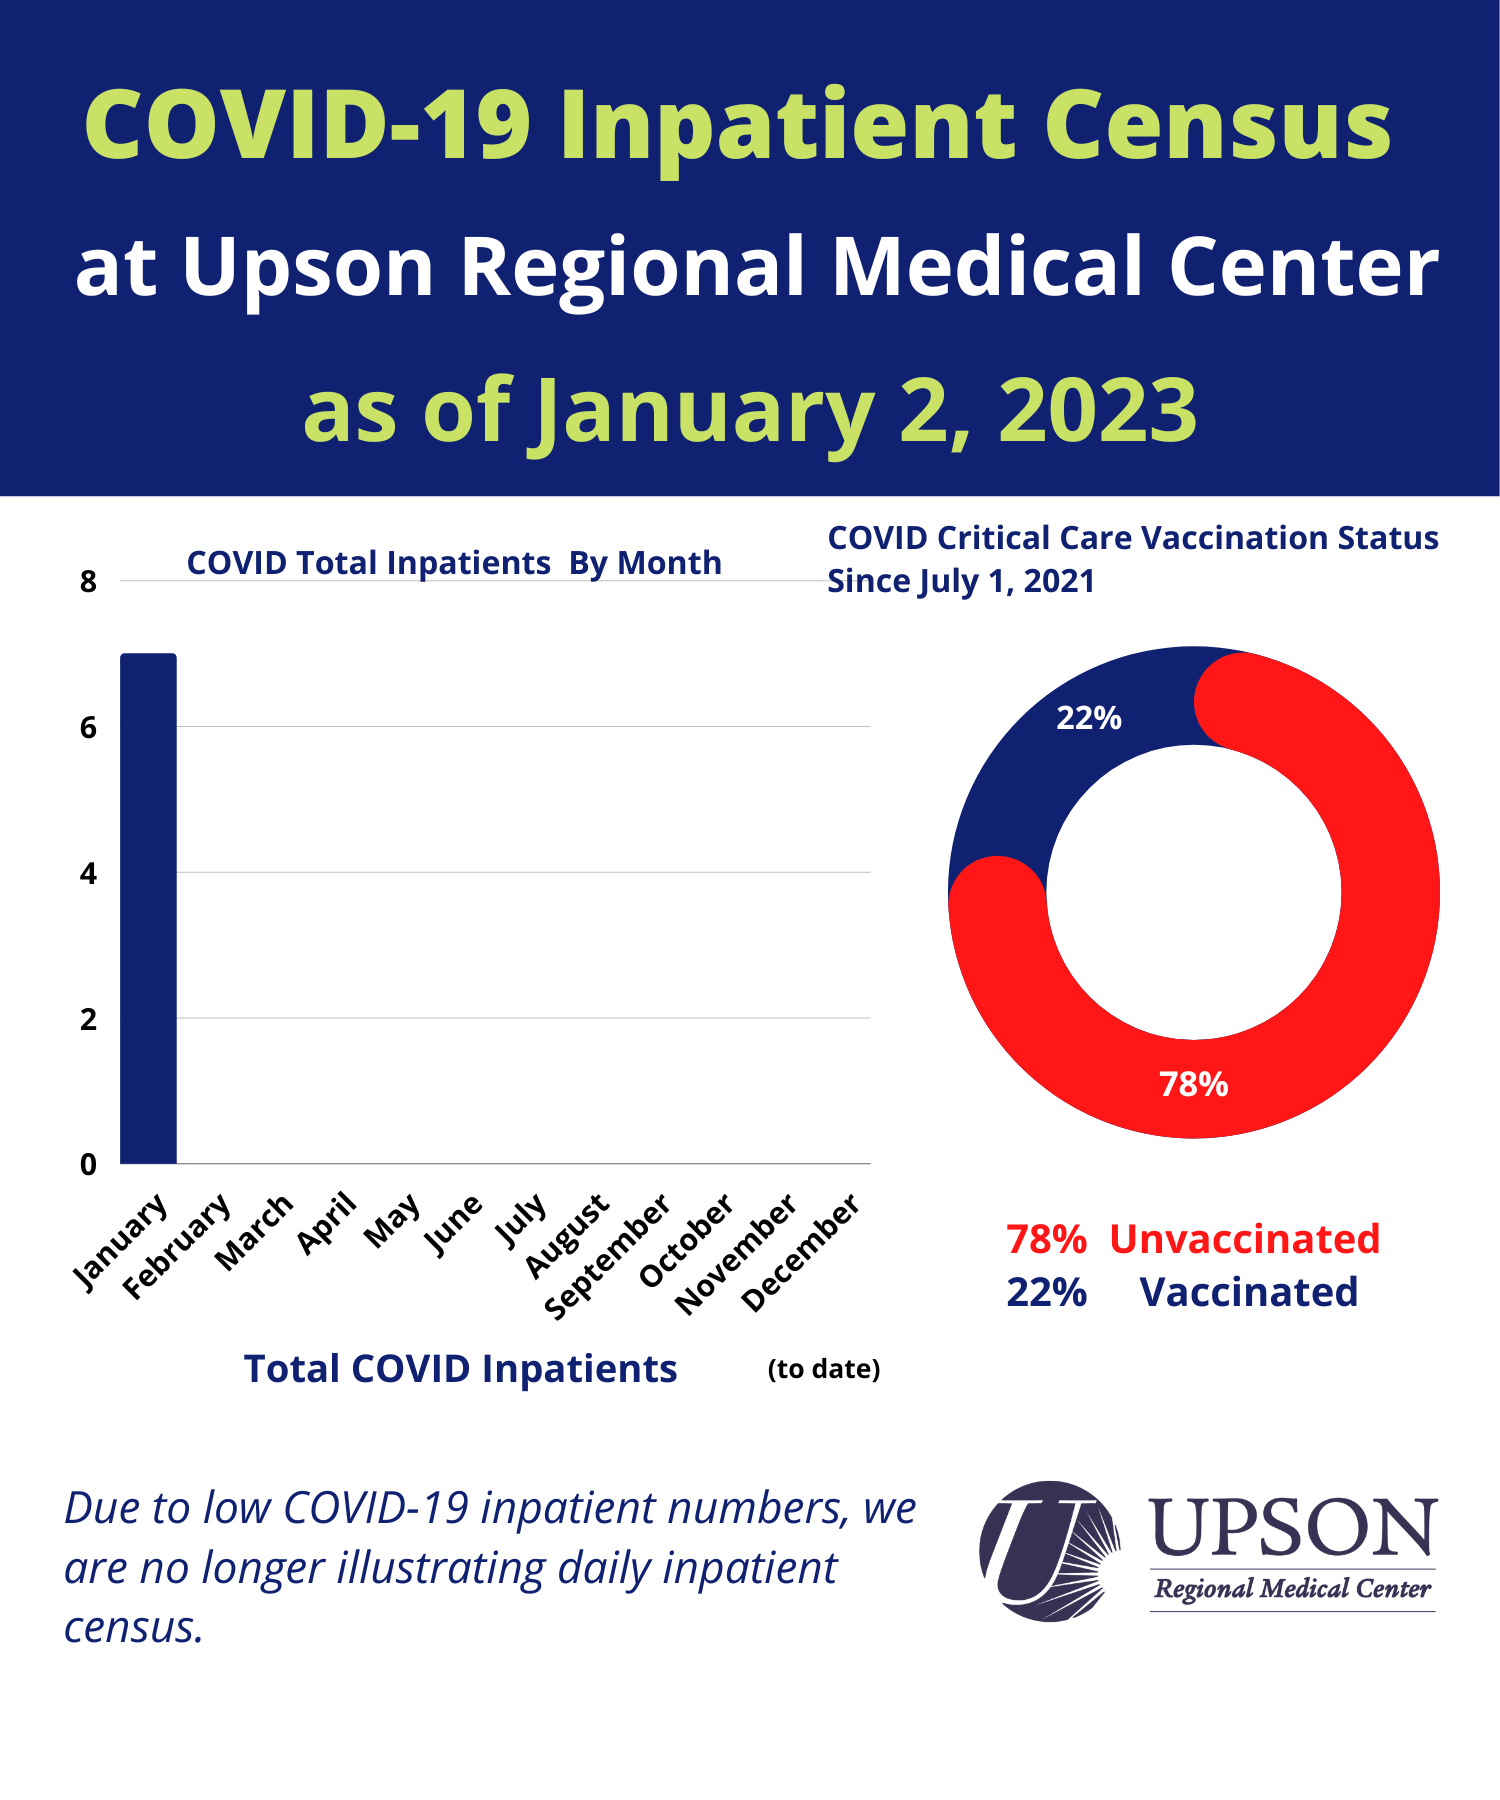 Photo for URMC COVID-19 inpatient status as of January 2, 2023.